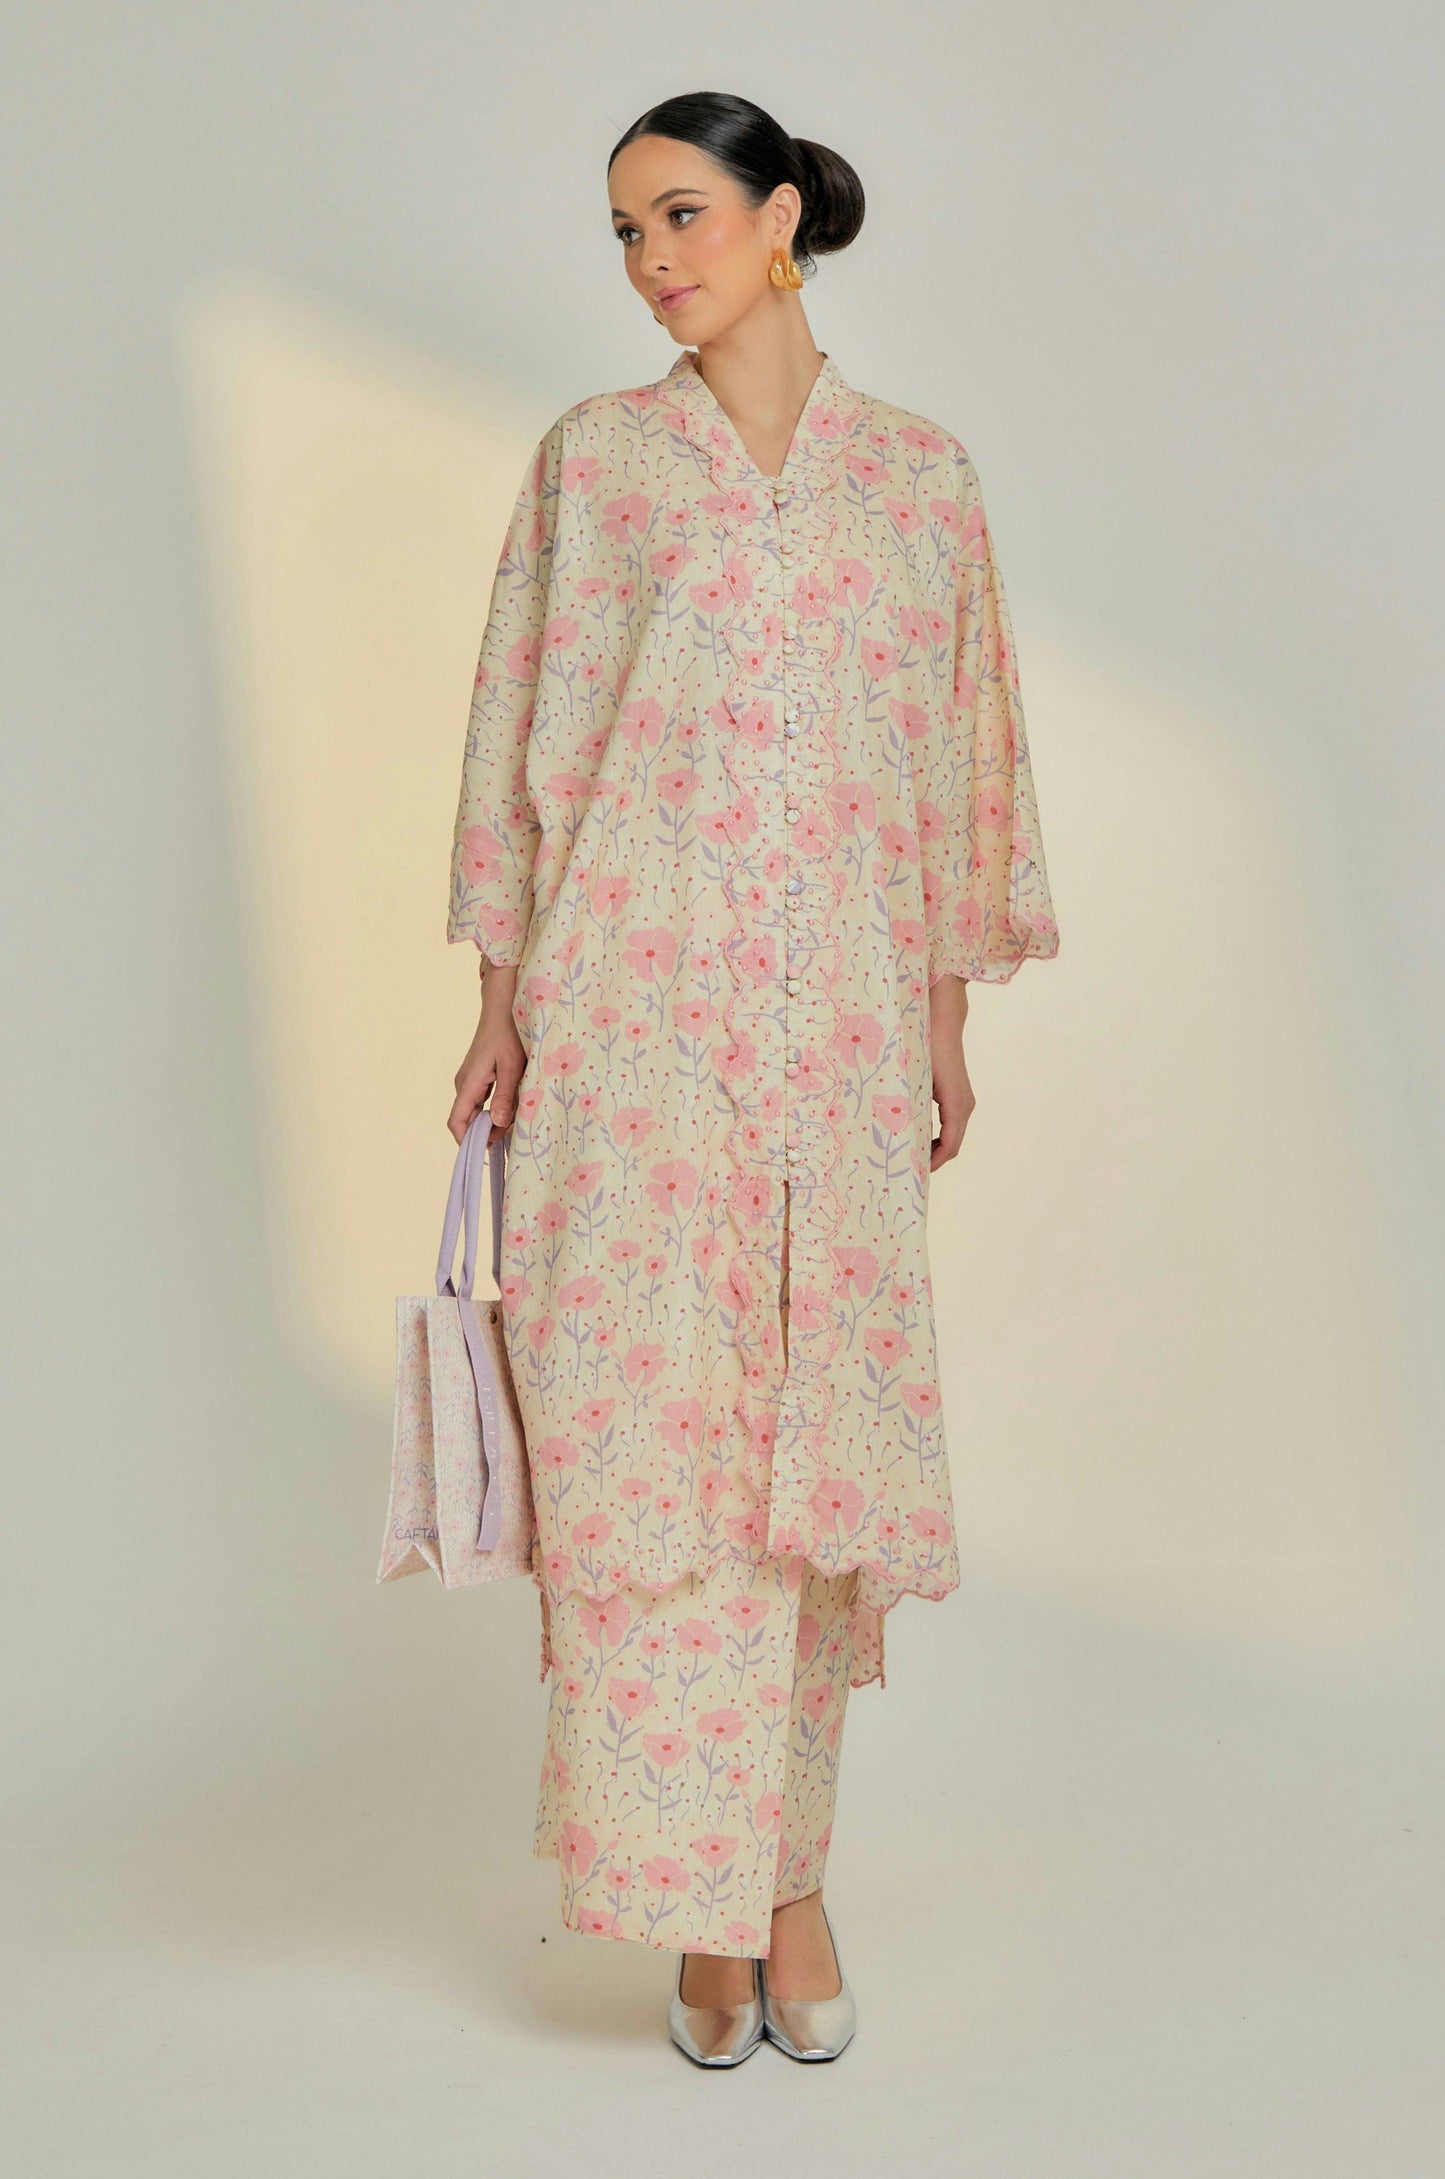 Indah Embroidery Kebaya Labuh in Poppy Cream (To be shipped by 20th February onwards) - Caftanist